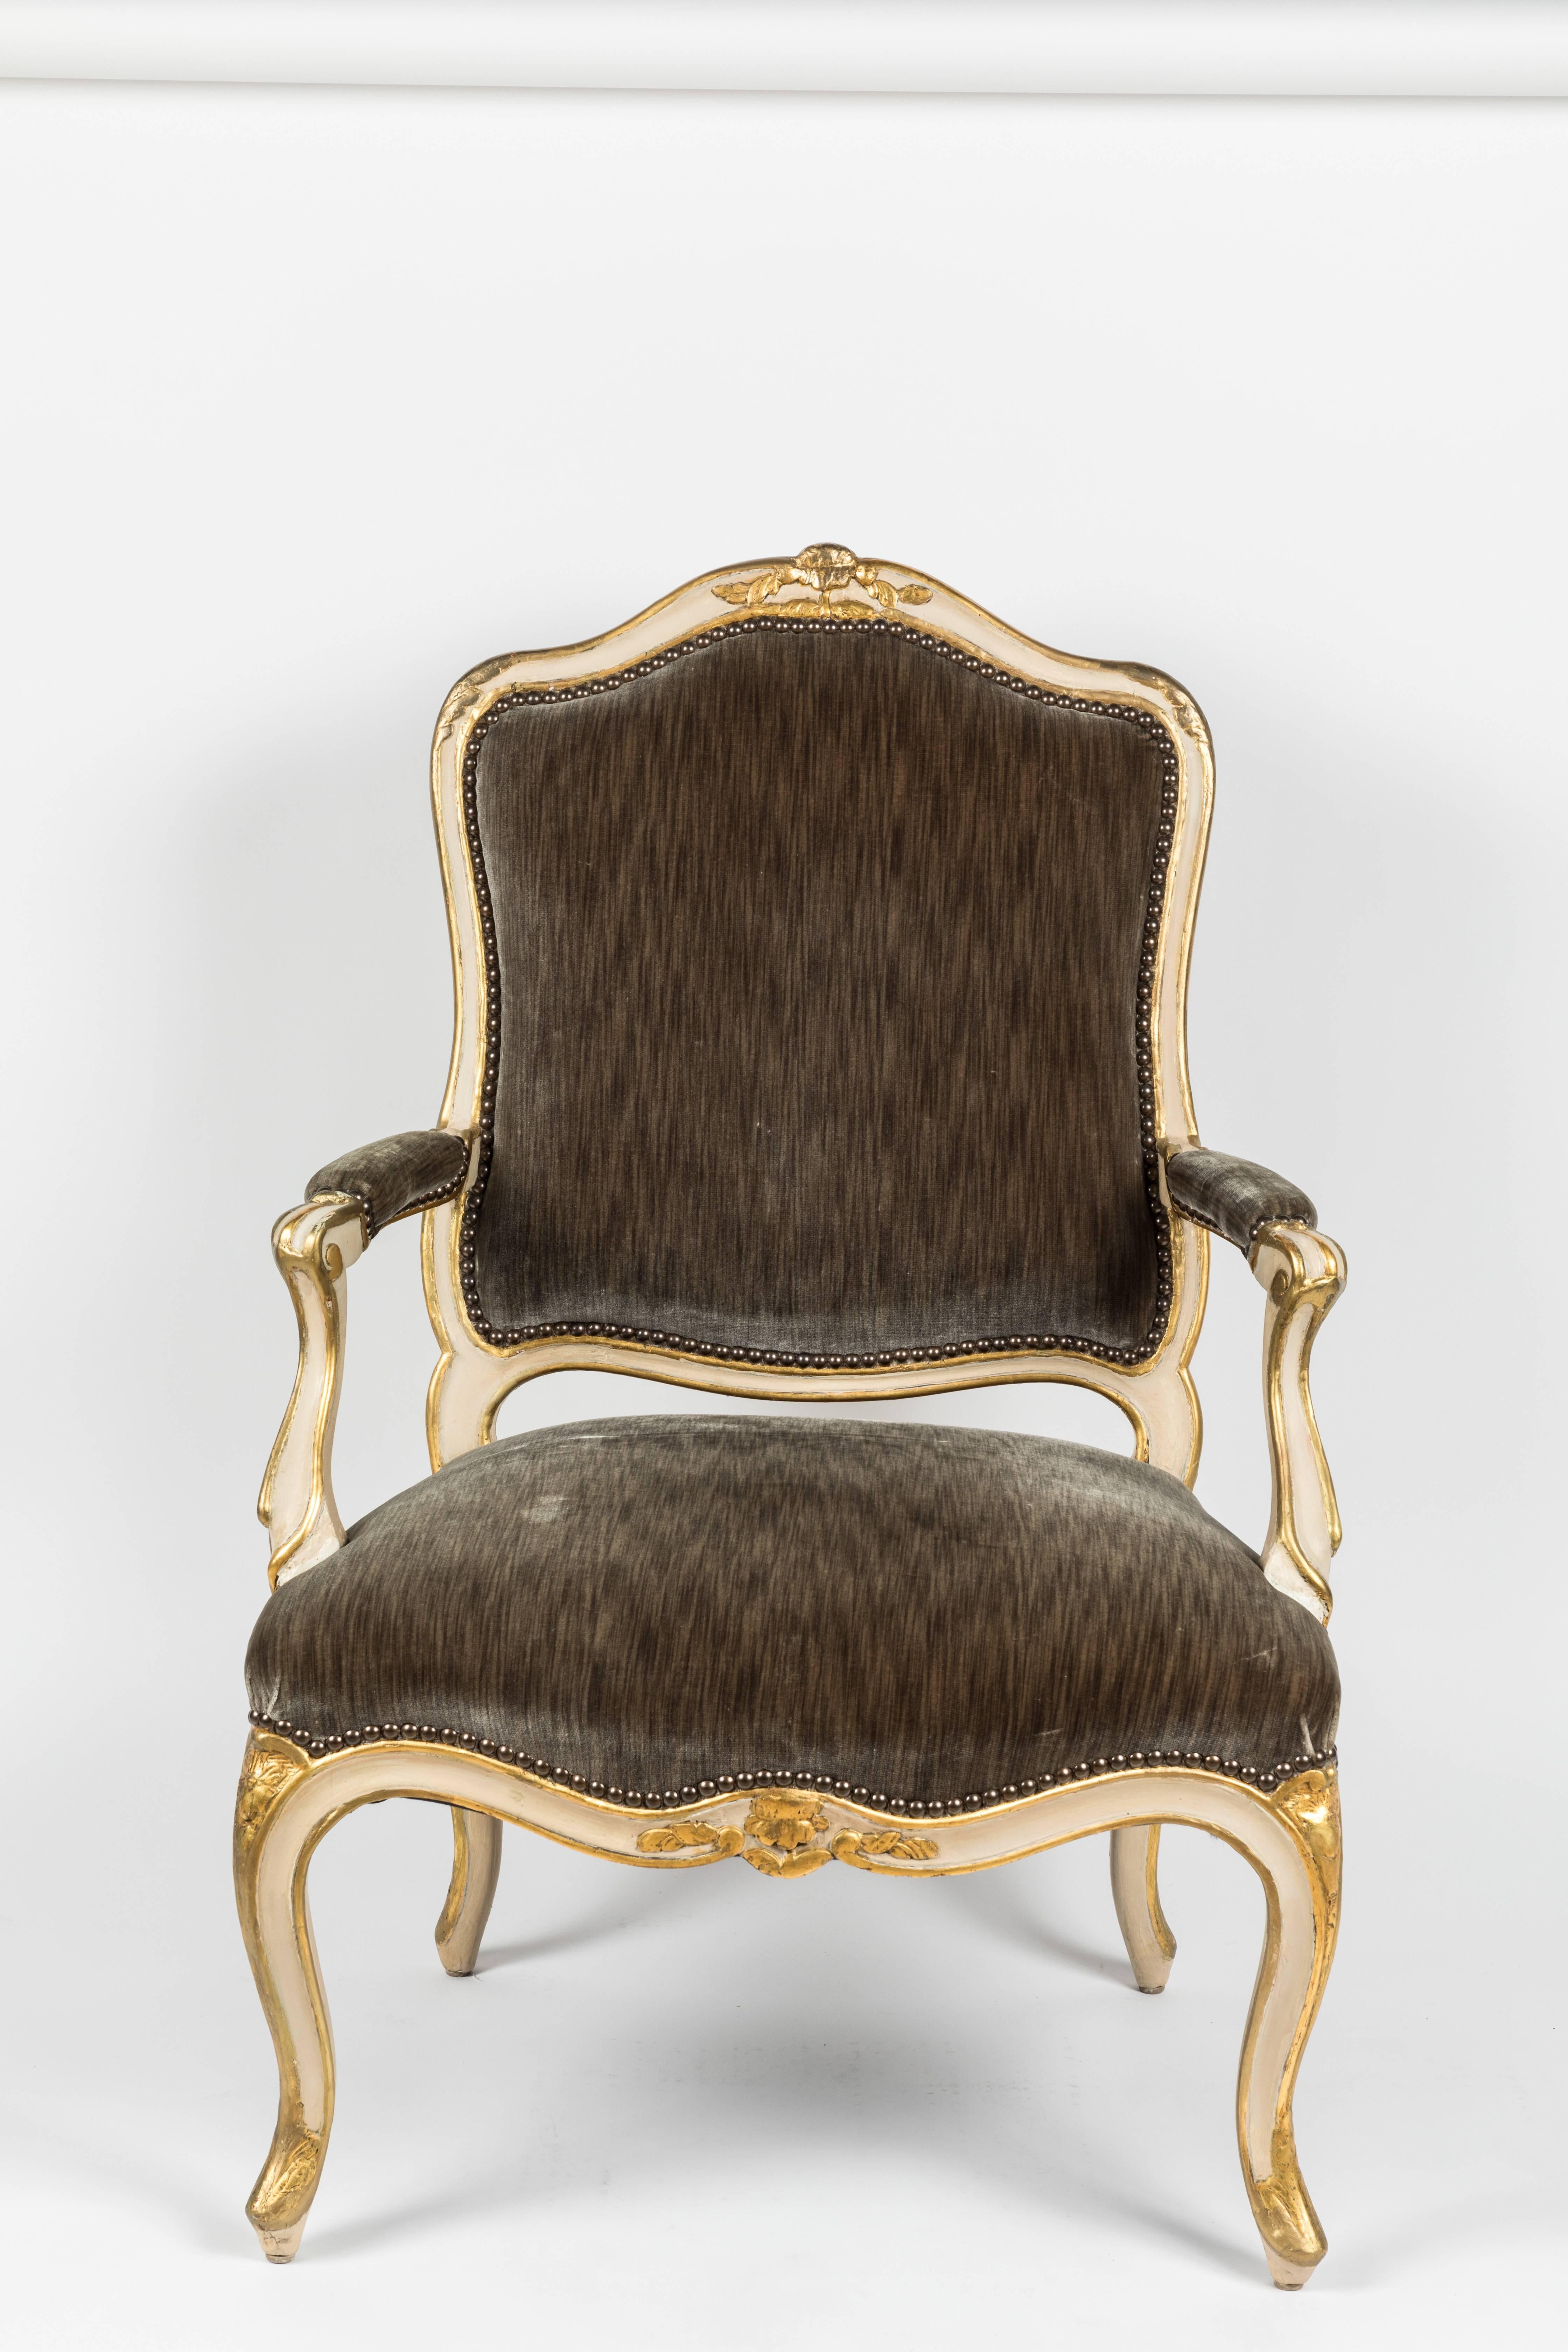 Antique fauteuil armchair in the Louis XV style. Polychrome and partial-giltwood frame. French, 19th century. Formerly in the collection of Iris and Gerald Cantor, Bel Air. Newly re-upholstered in charcoal silk velvet.